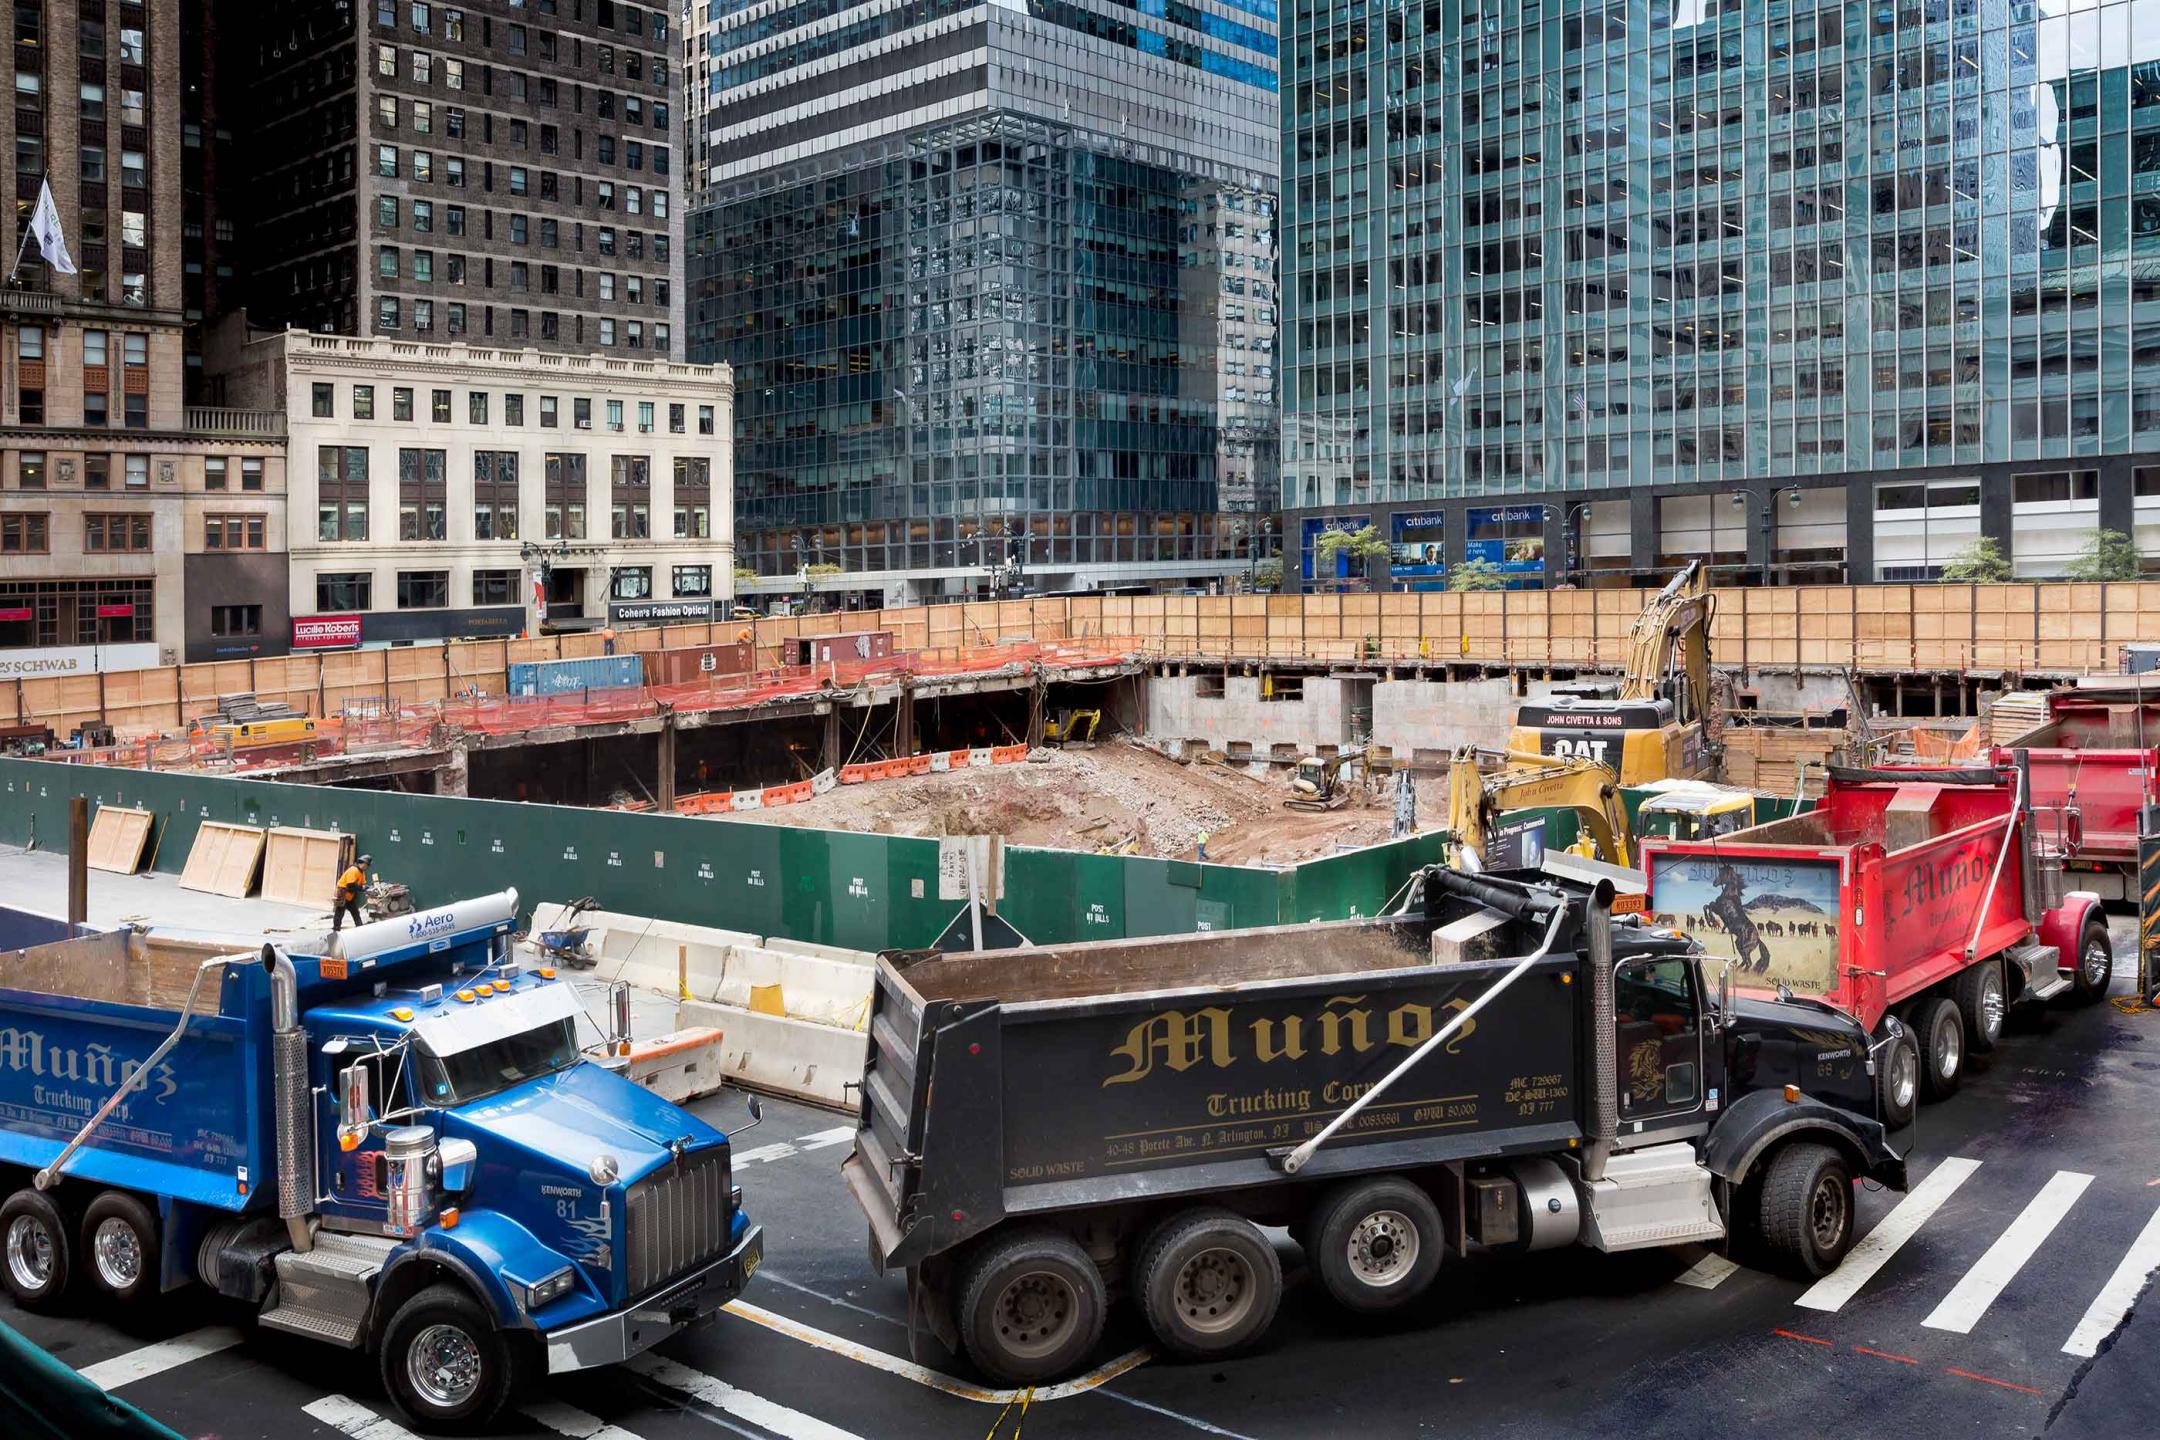 Munoz Trucking - 42nd and Madison Ave - NYC  : Construction : New York NY Architectural Photographer | Interior and Exterior